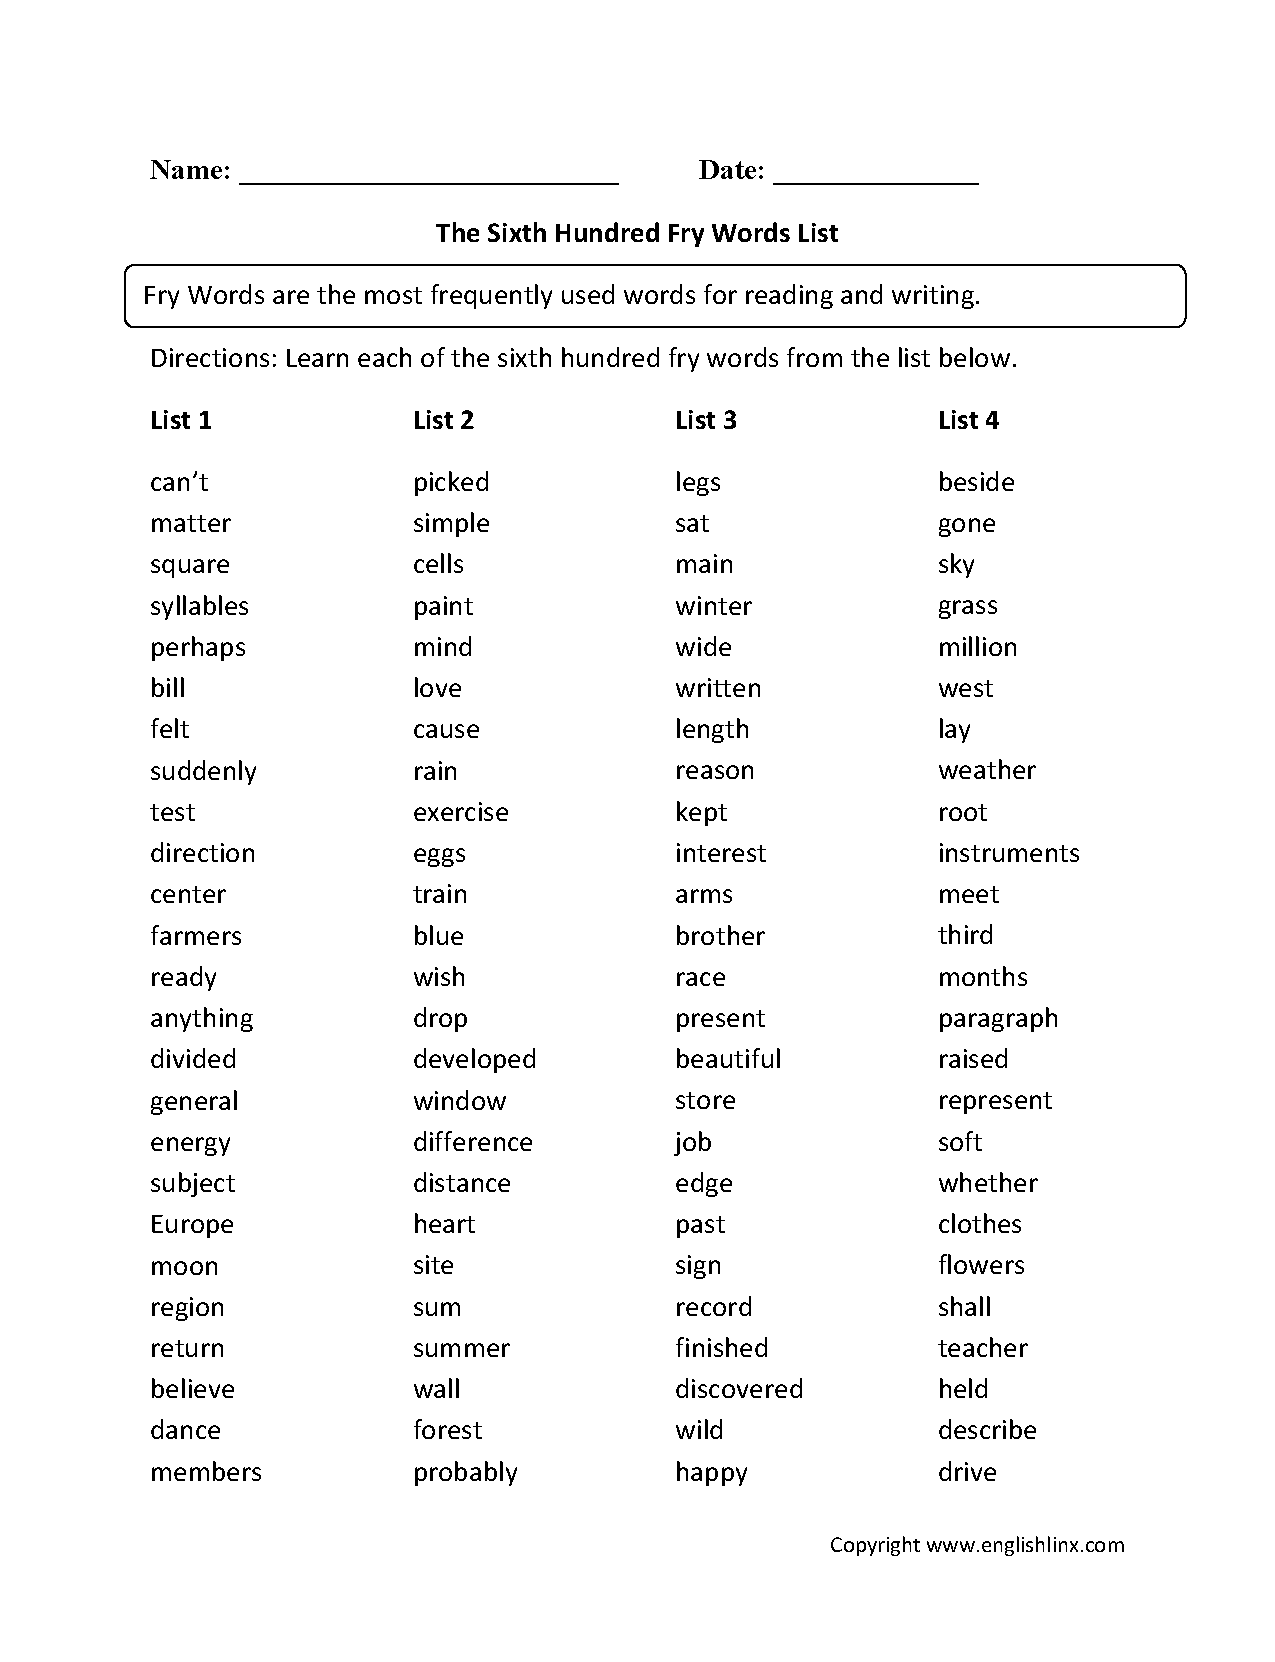 6Th Grade Sight Words Printable 15 Best Images Of 6th Grade Spelling Words Worksheets 6th